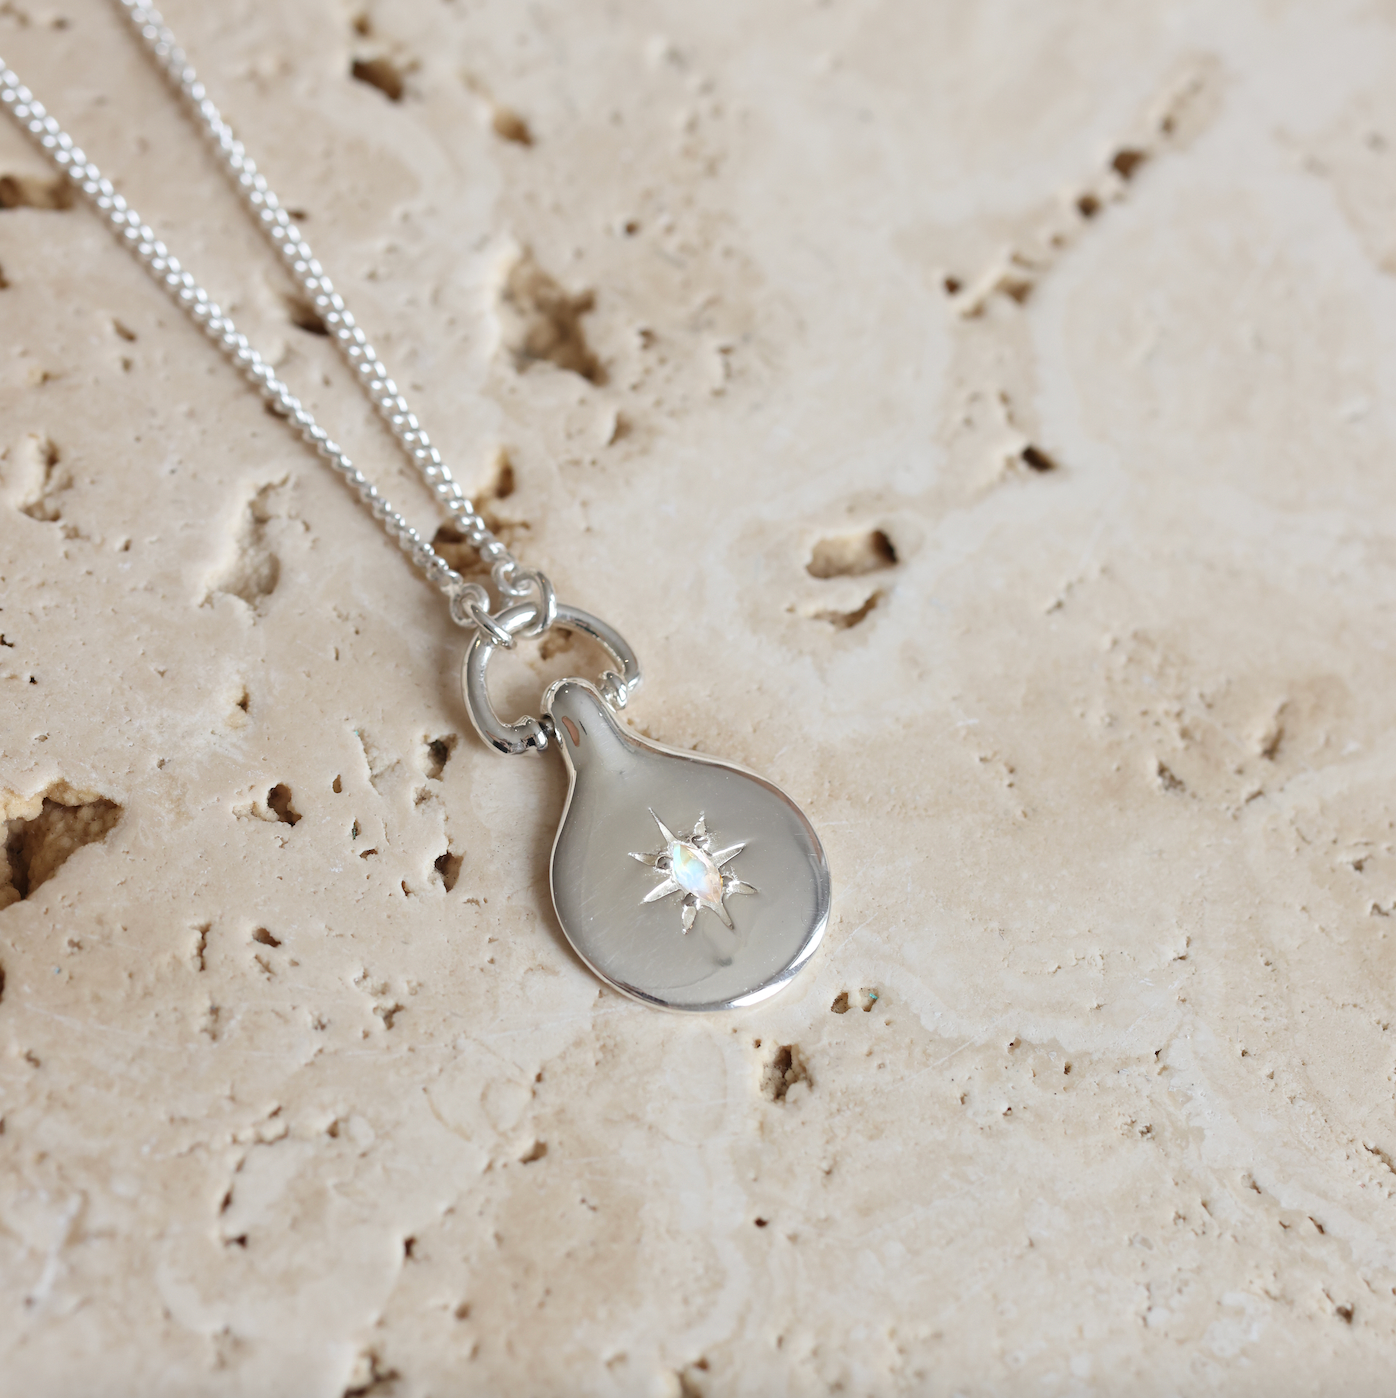 The Starry Night Moonstone Silver Pendant